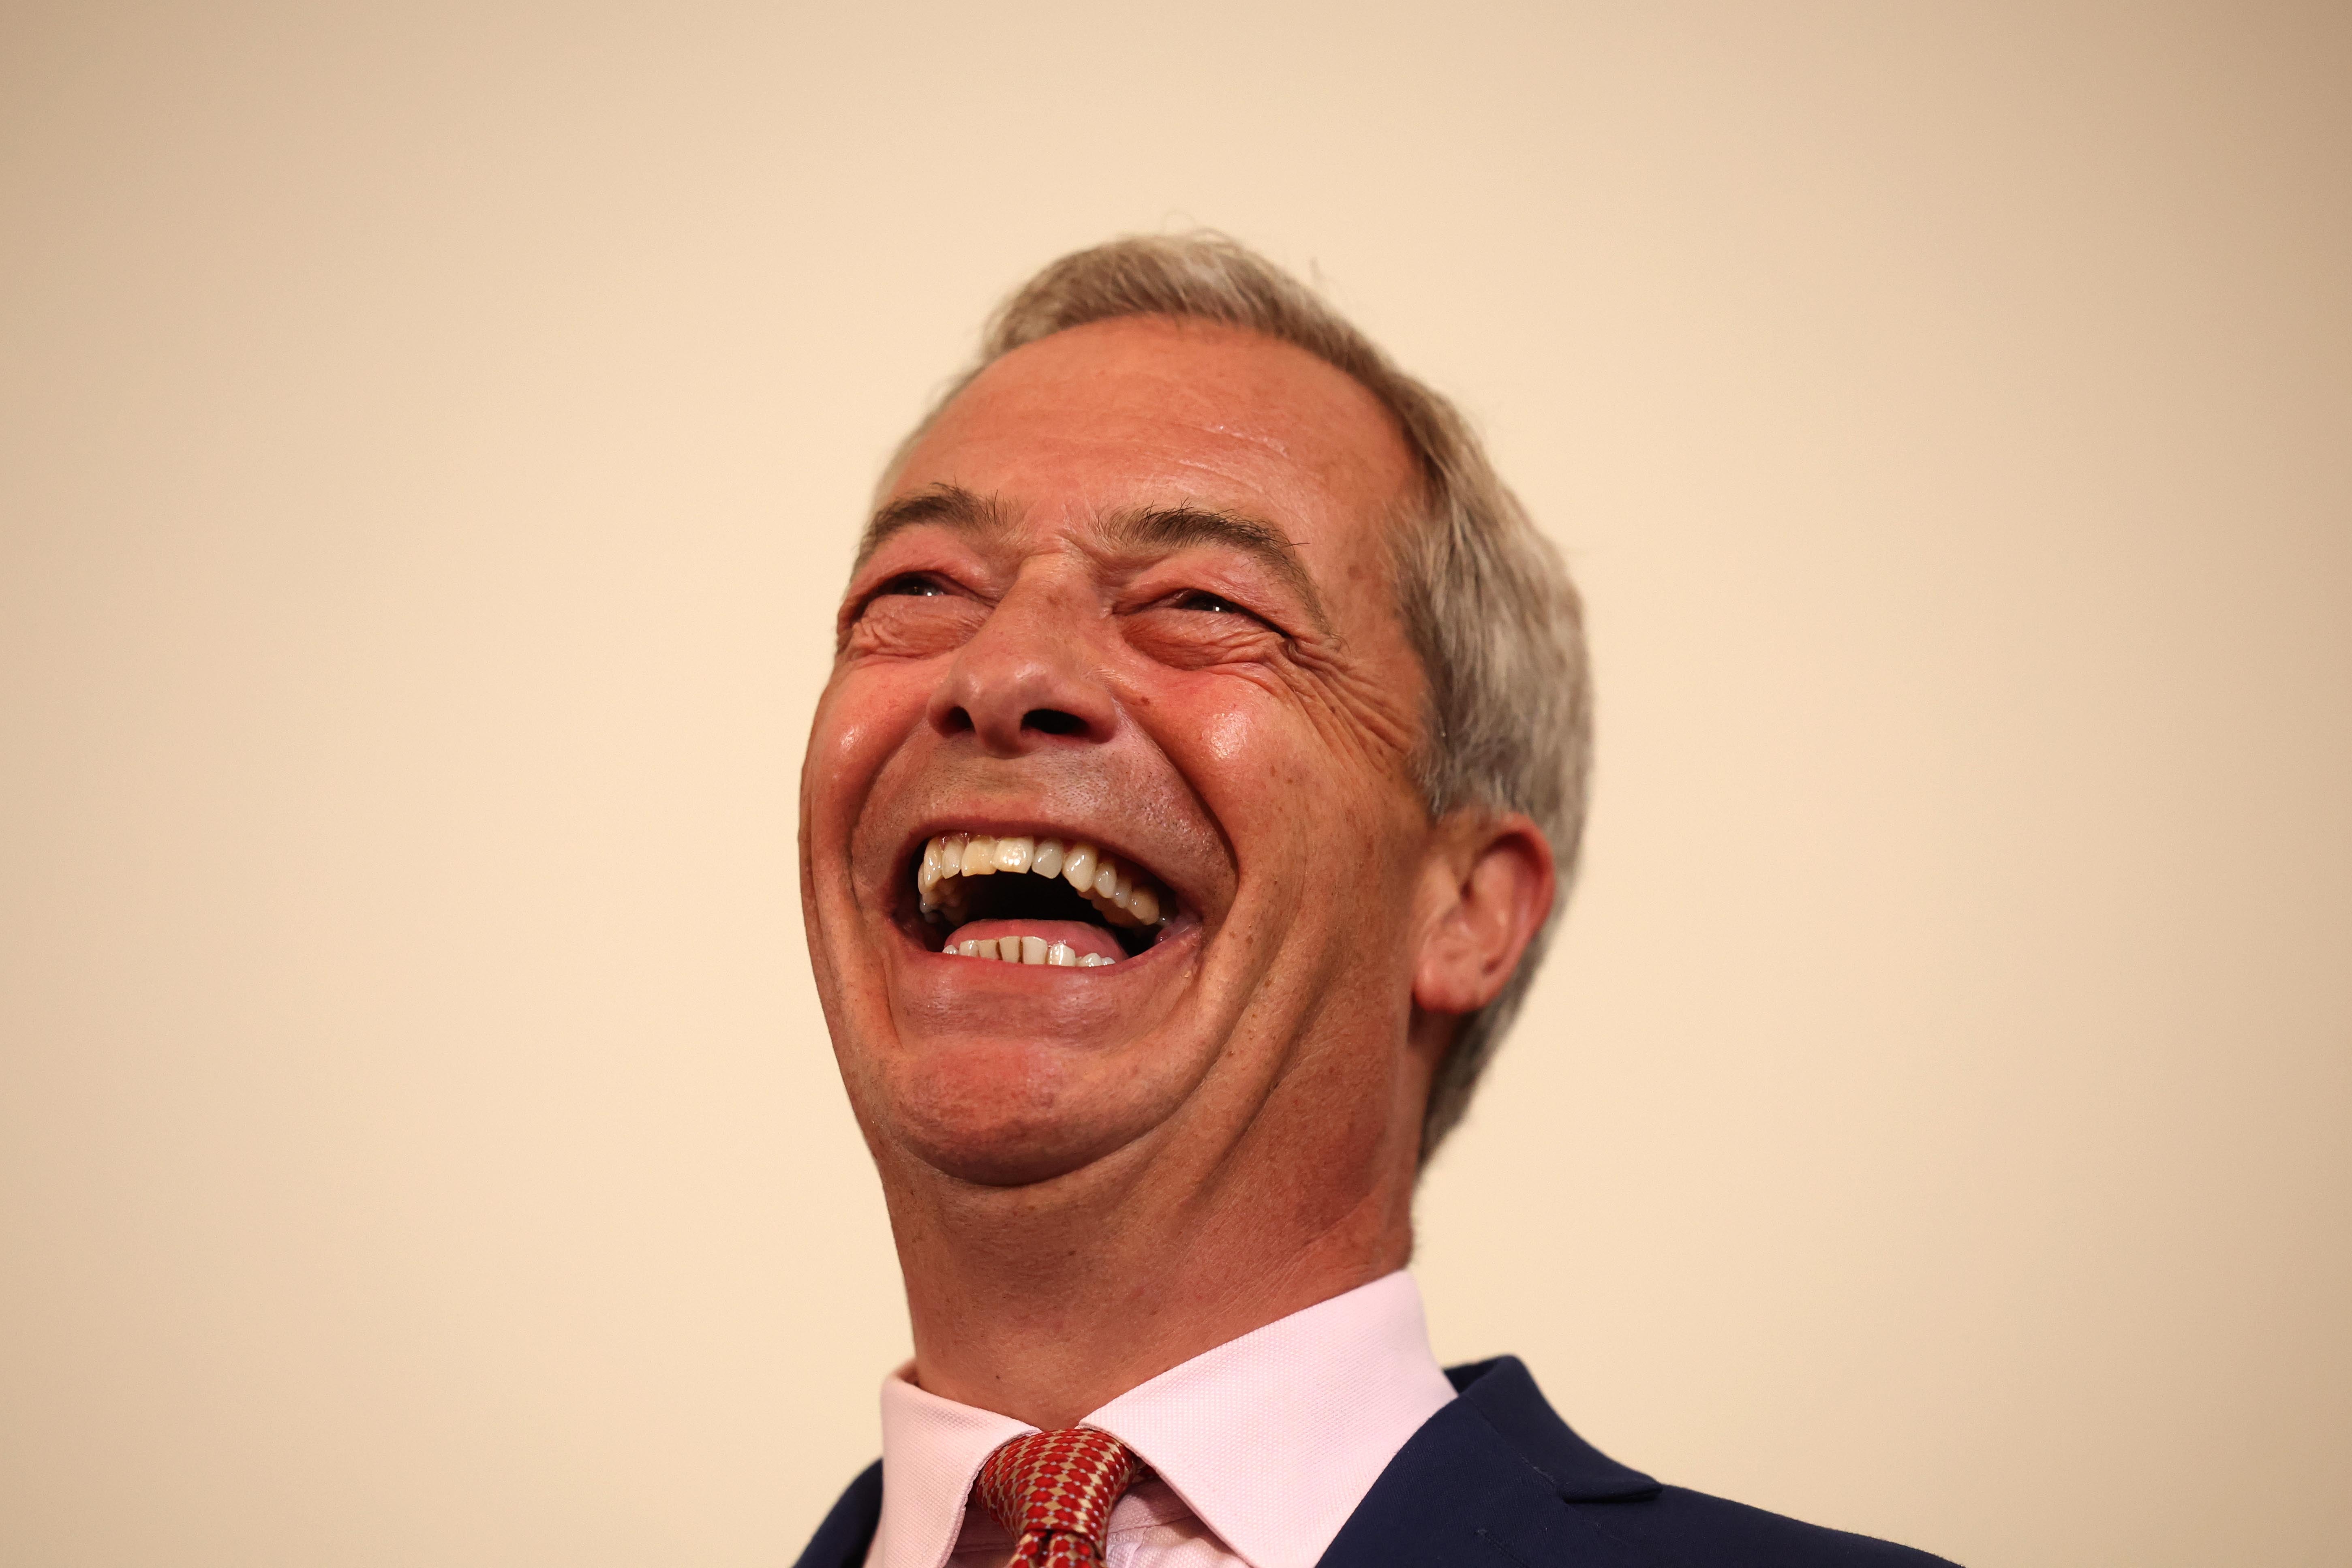 Nigel Farage is openly laughing at the Tories’ predicament